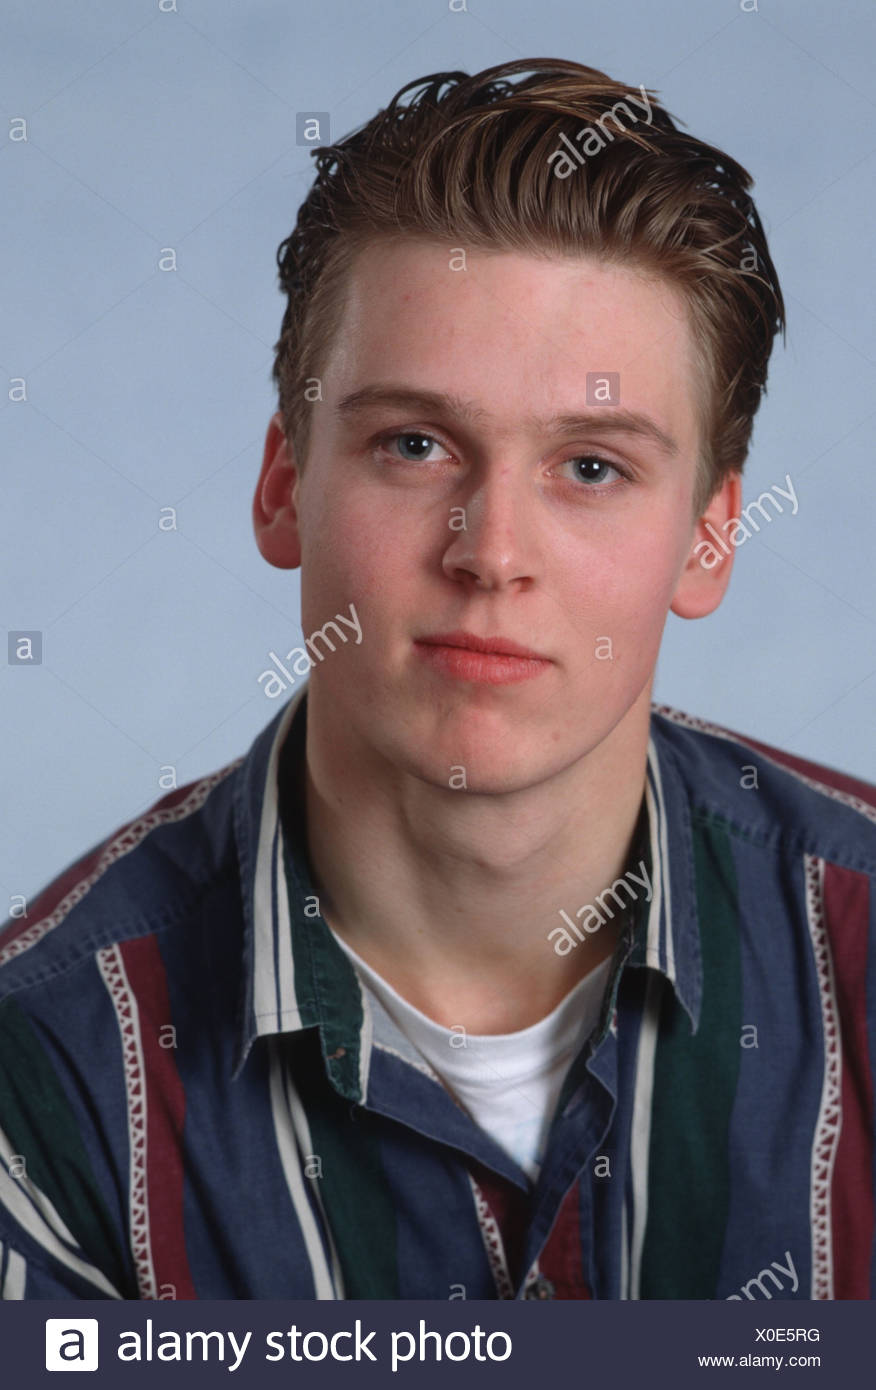 80s Hairstyle Stock Photos 80s Hairstyle Stock Images Alamy